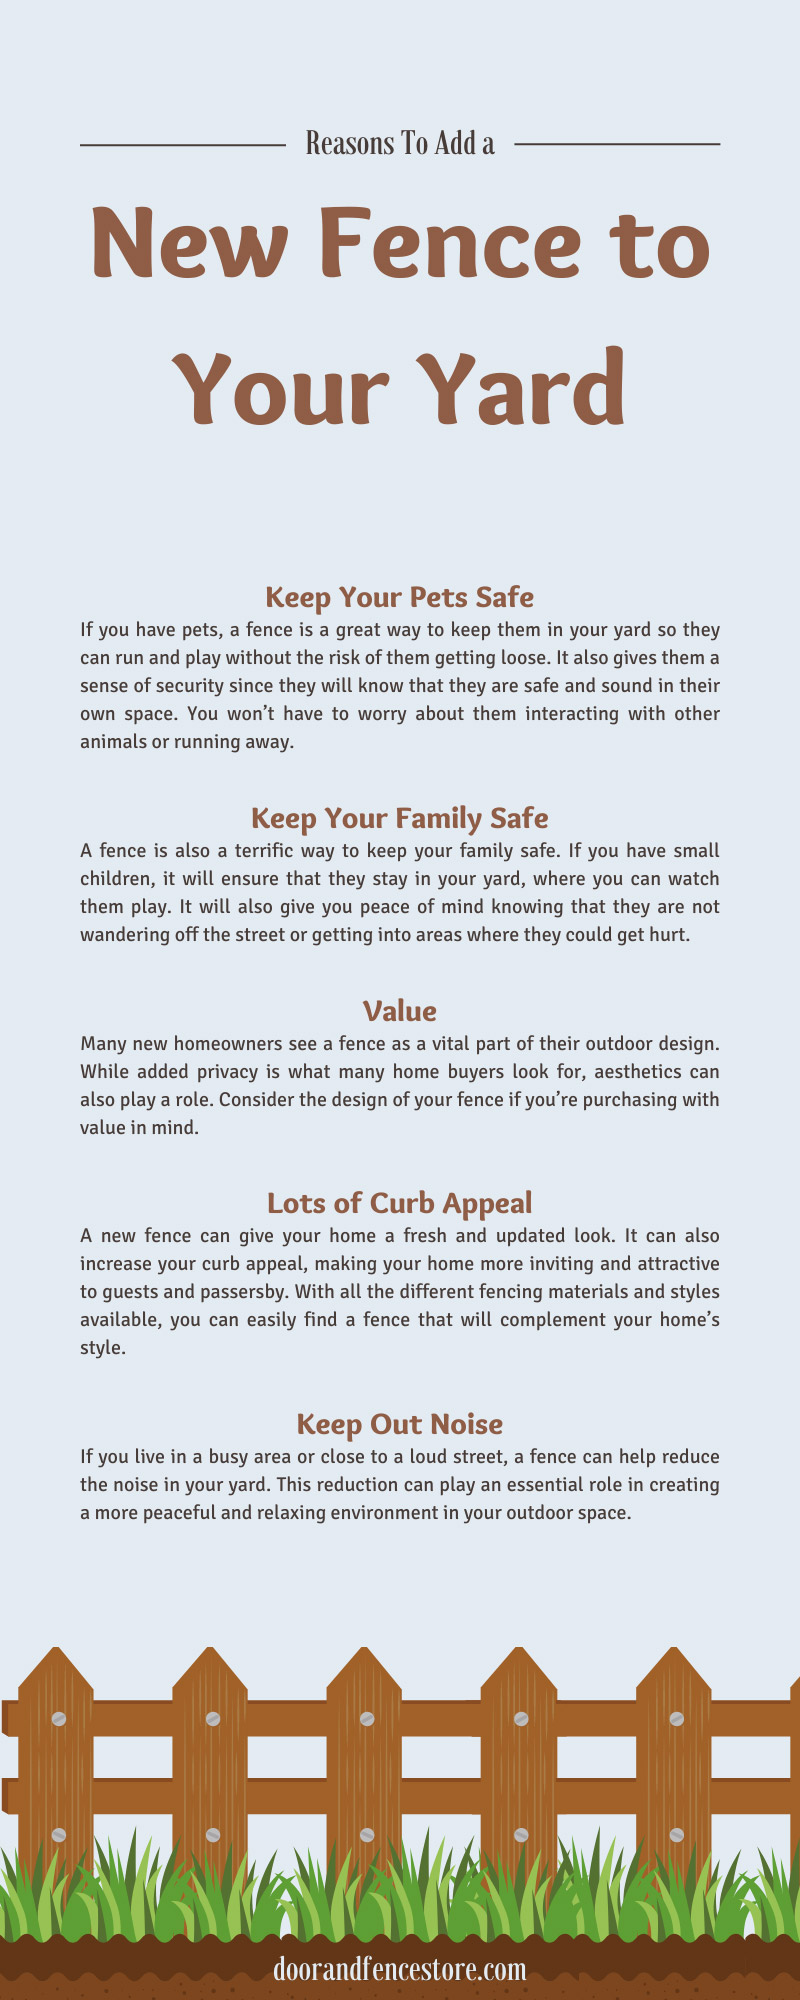 The Top 8 Reasons To Add a New Fence to Your Yard